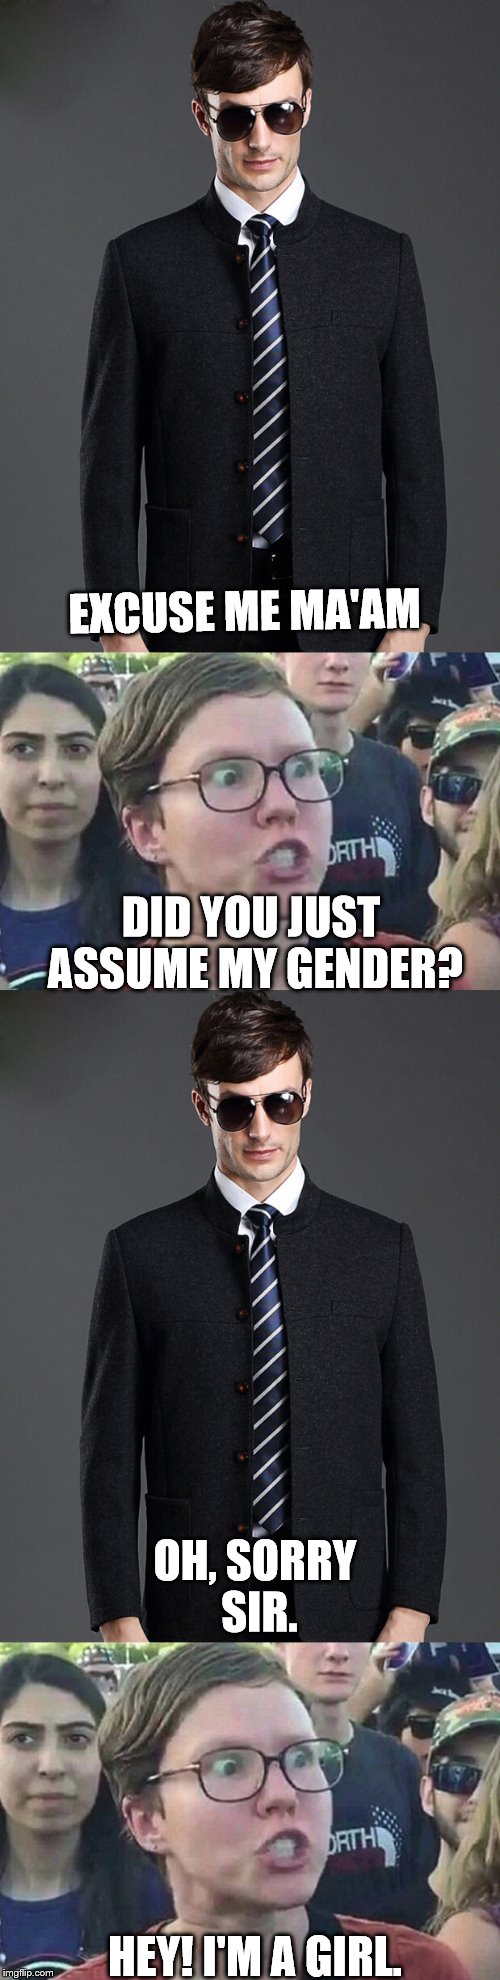 Choose a gender or society will choose one for you. | EXCUSE ME MA'AM; DID YOU JUST ASSUME MY GENDER? OH, SORRY SIR. HEY! I'M A GIRL. | image tagged in man in suit,triggered feminist | made w/ Imgflip meme maker